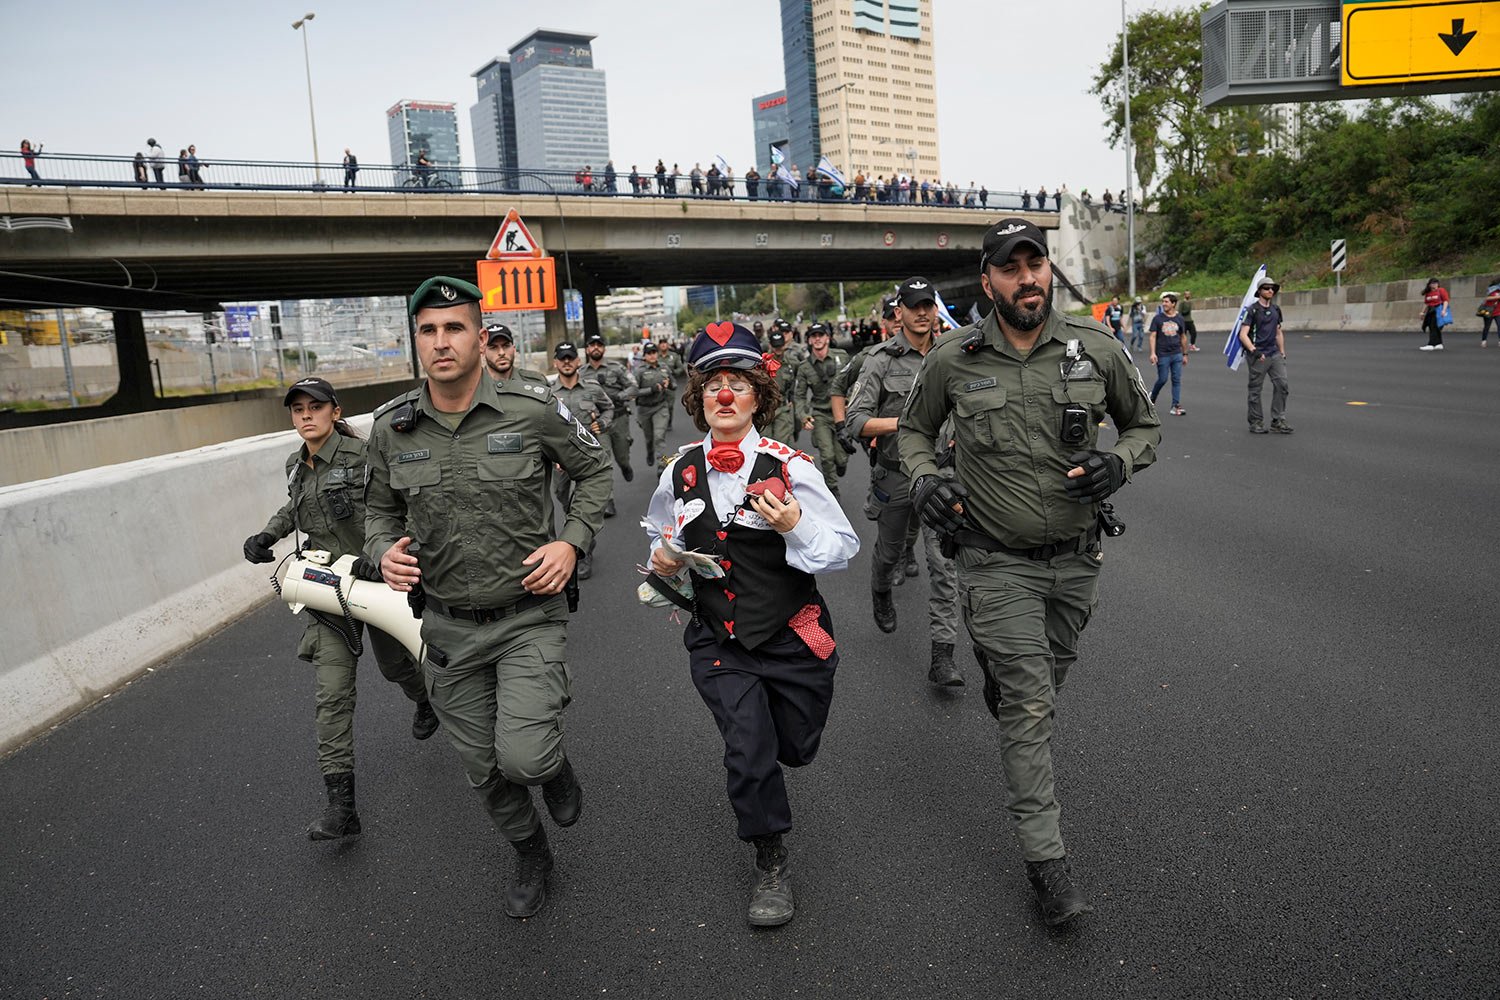  An Israeli activist dressed as a clown runs with border police as Israelis protest against plans by Prime Minister Benjamin Netanyahu's government to overhaul the judicial system block a free way in Tel Aviv, Israel, Thursday, March 23, 2023. (AP Ph